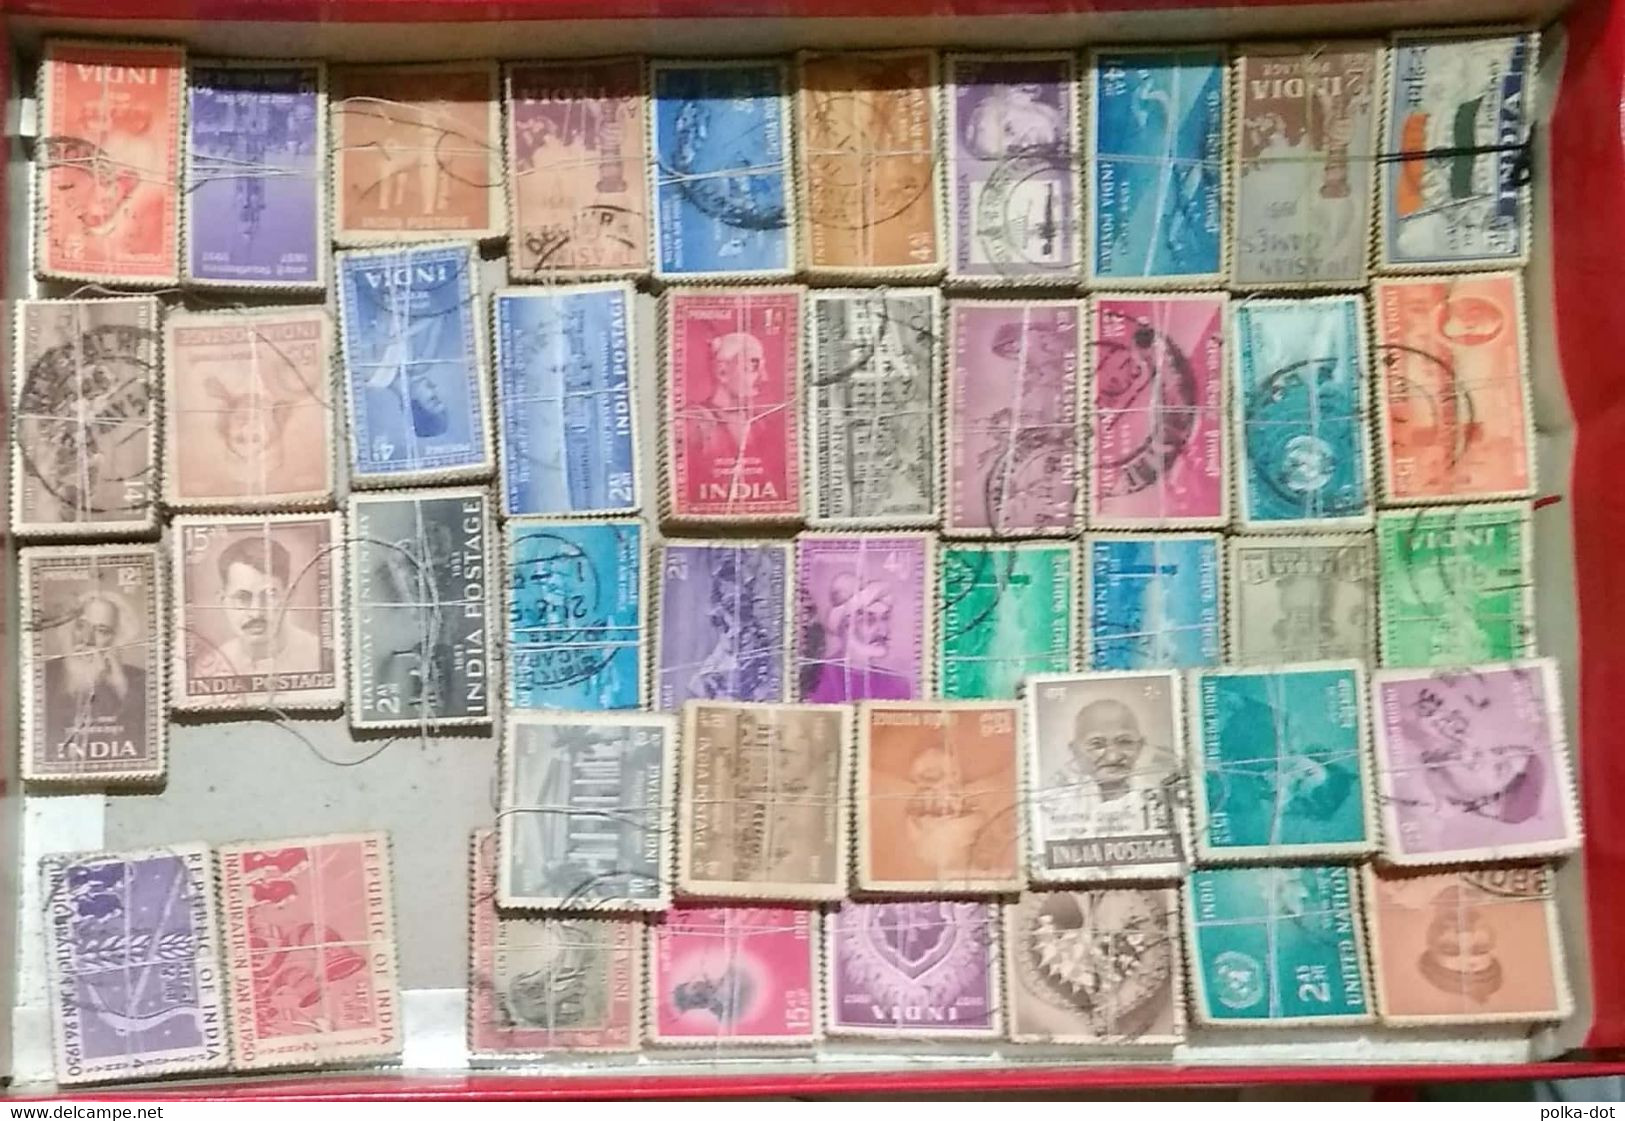 INDIA 1947 THROUGH 2010 COMMEMORATIVE STAMPS USED 100+ DIFFERENT RANDOMLY PICKED PICKED FROM THIS HORDE